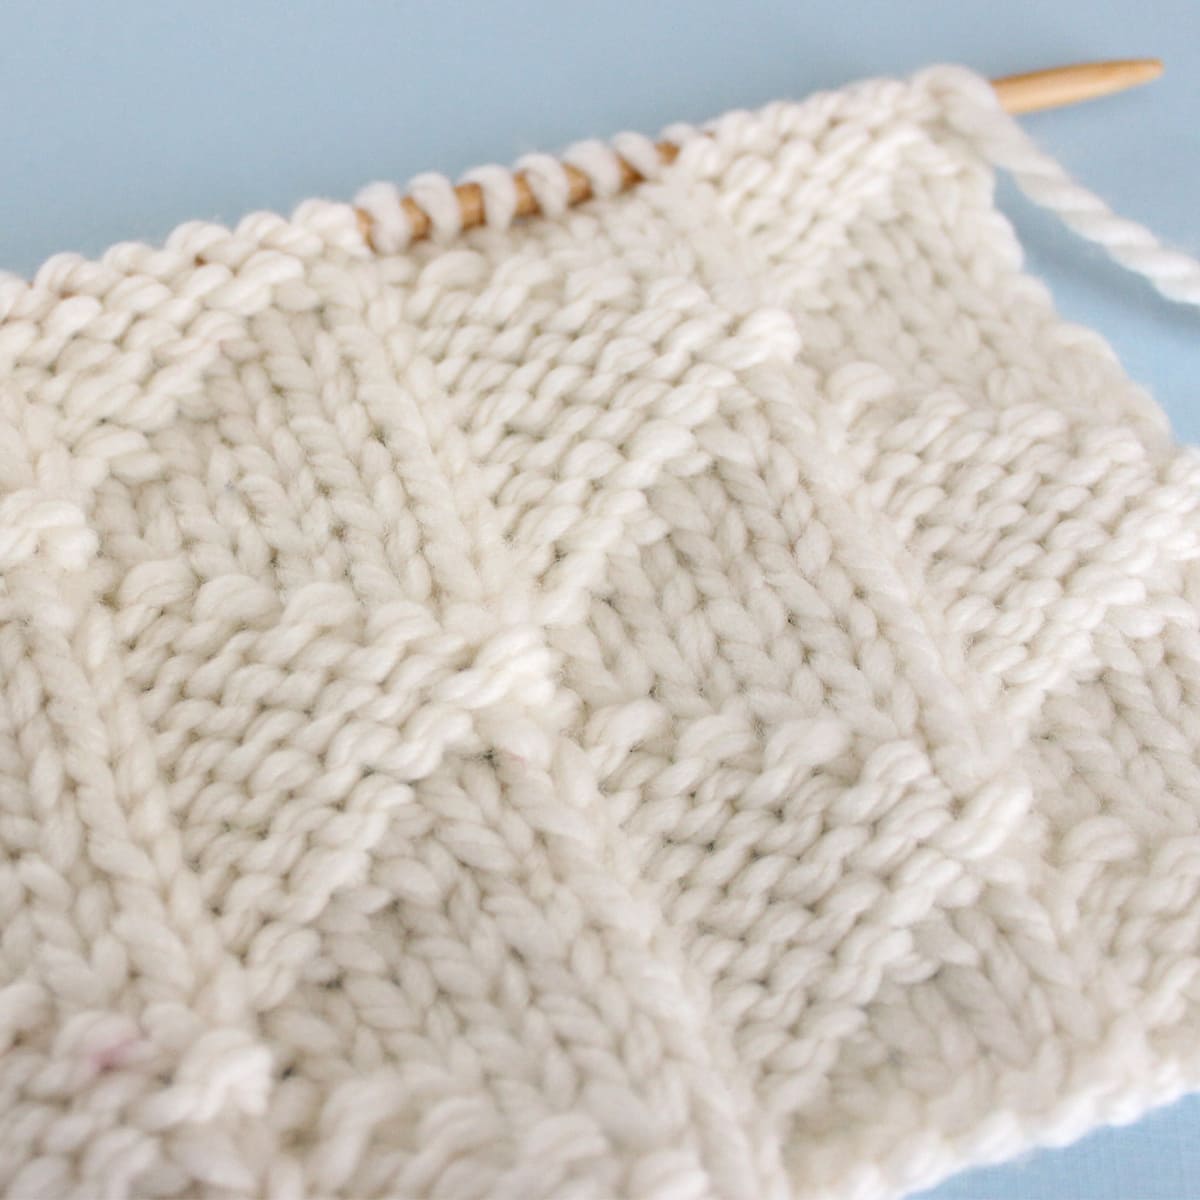 Pennant Pleating stitch in white color yarn on knitting needle.